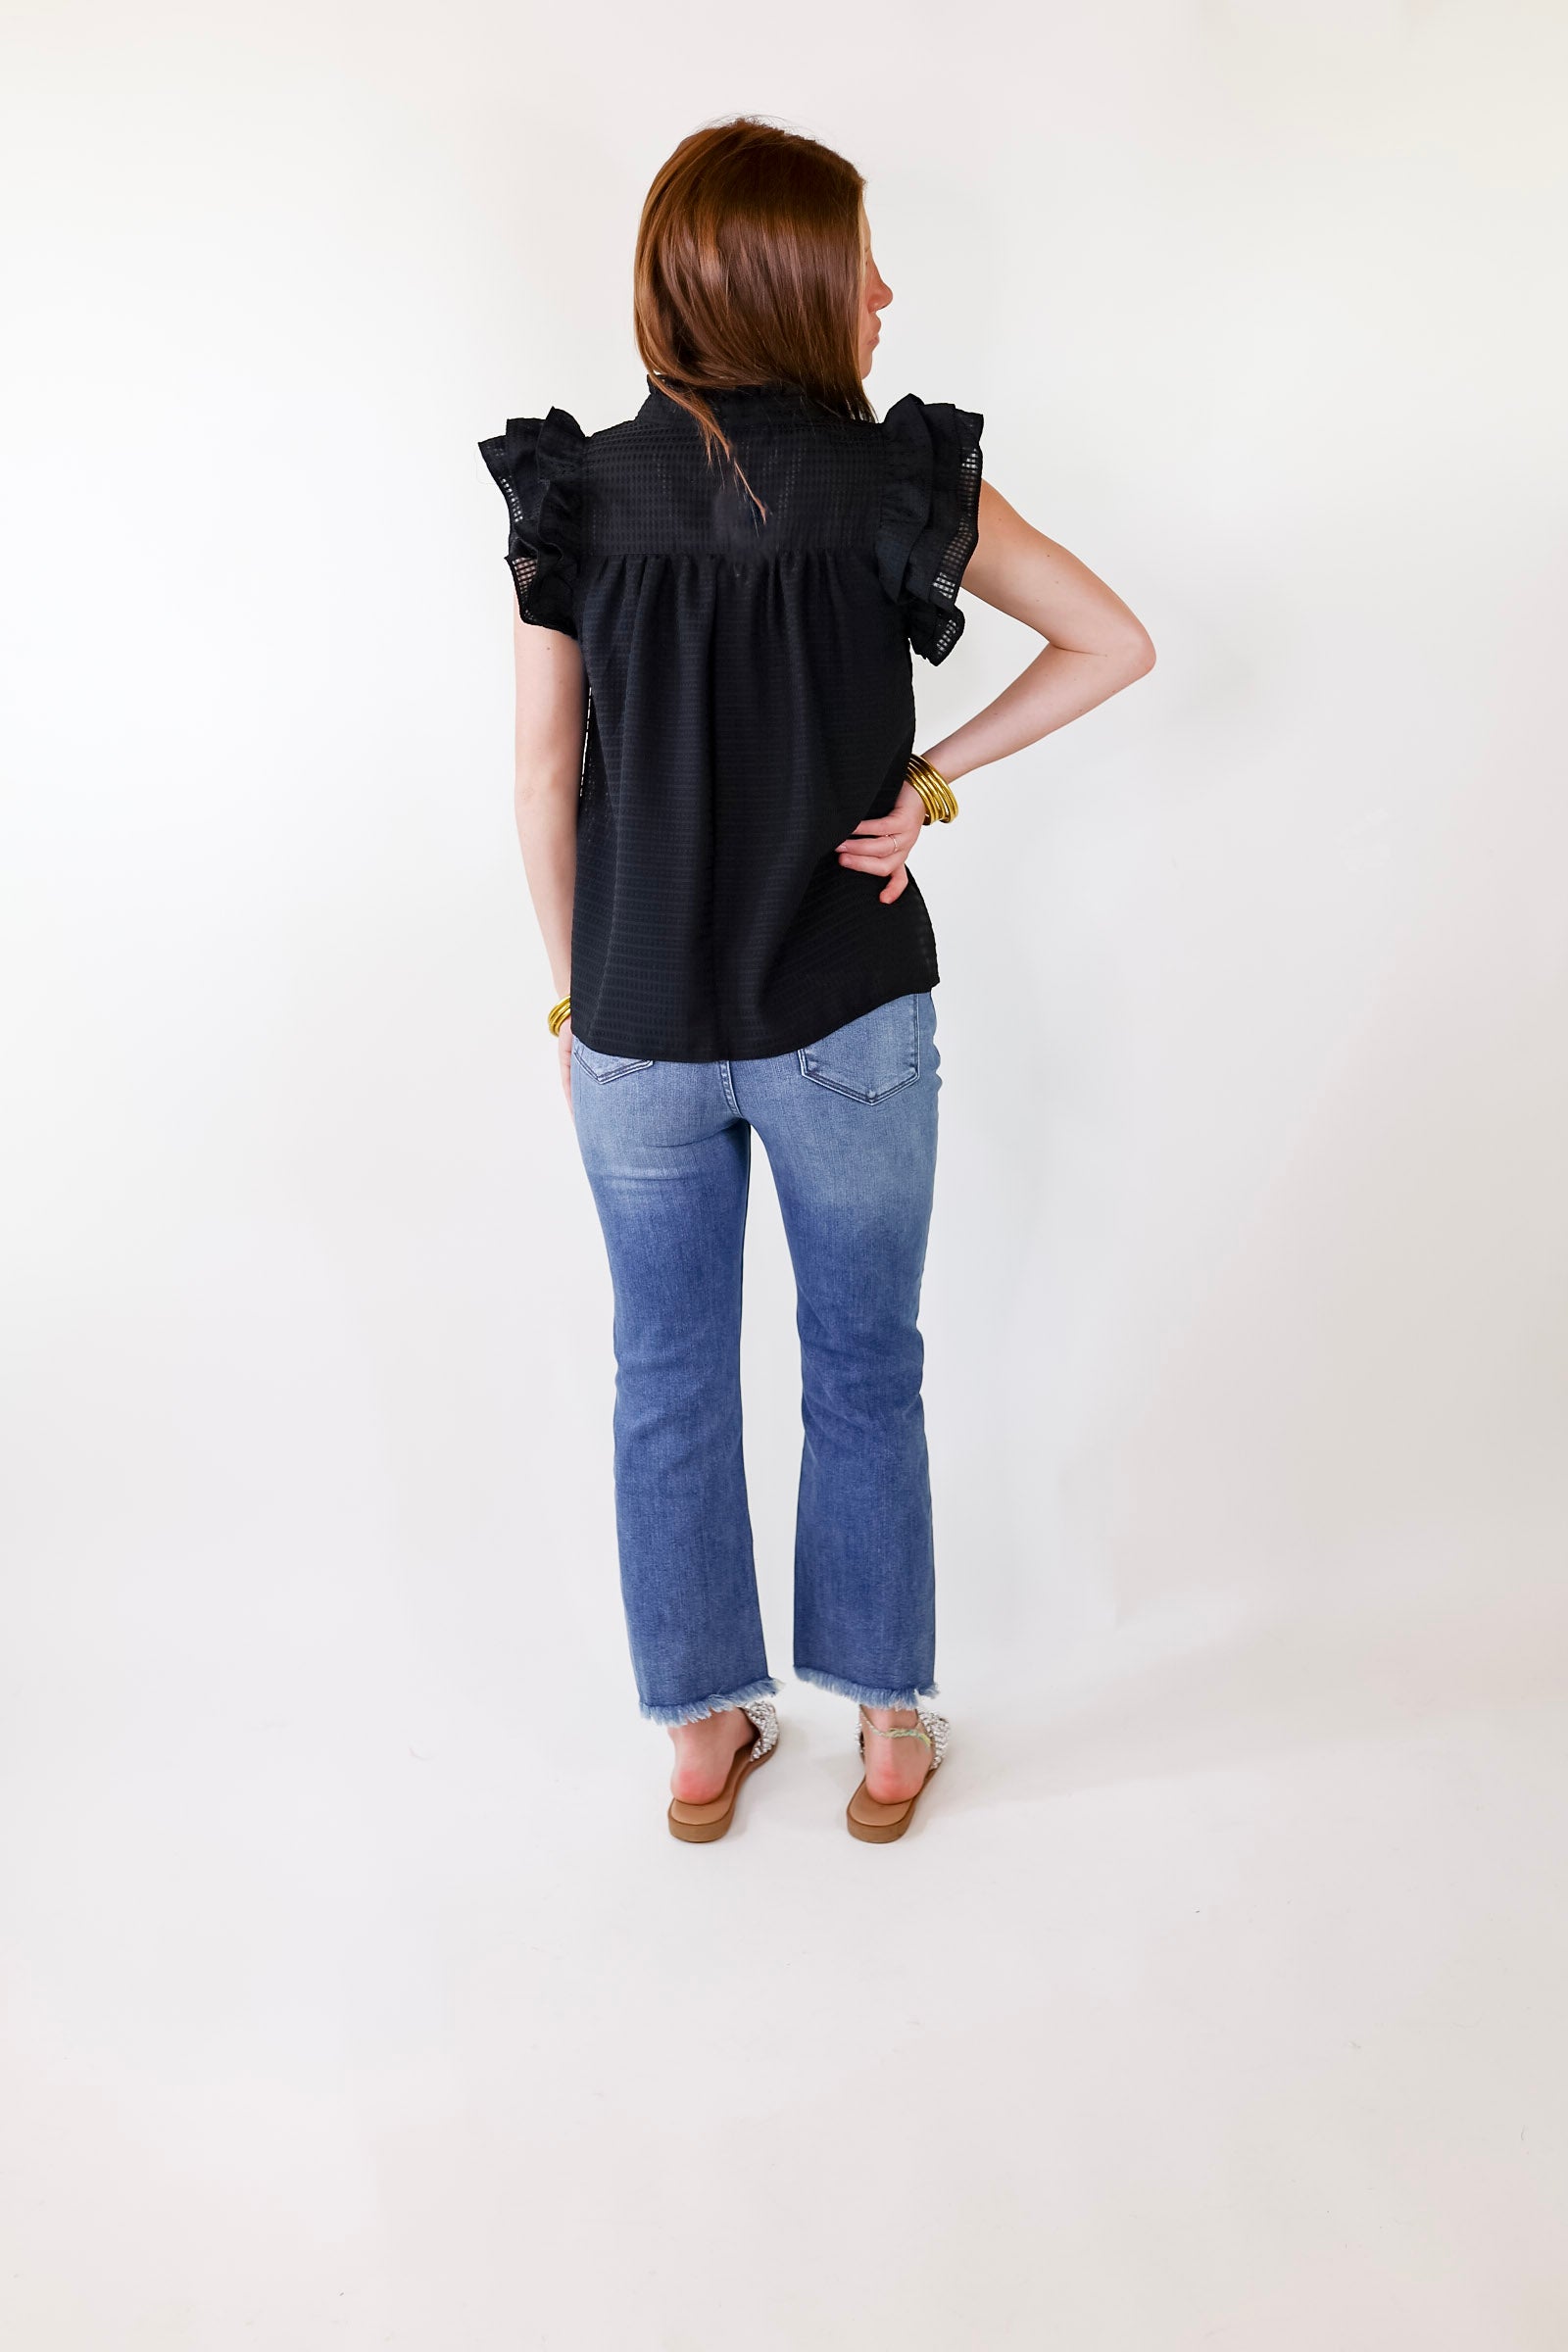 Perfectly Fabulous Ruffle Cap Sleeve Top in Black - Giddy Up Glamour Boutique